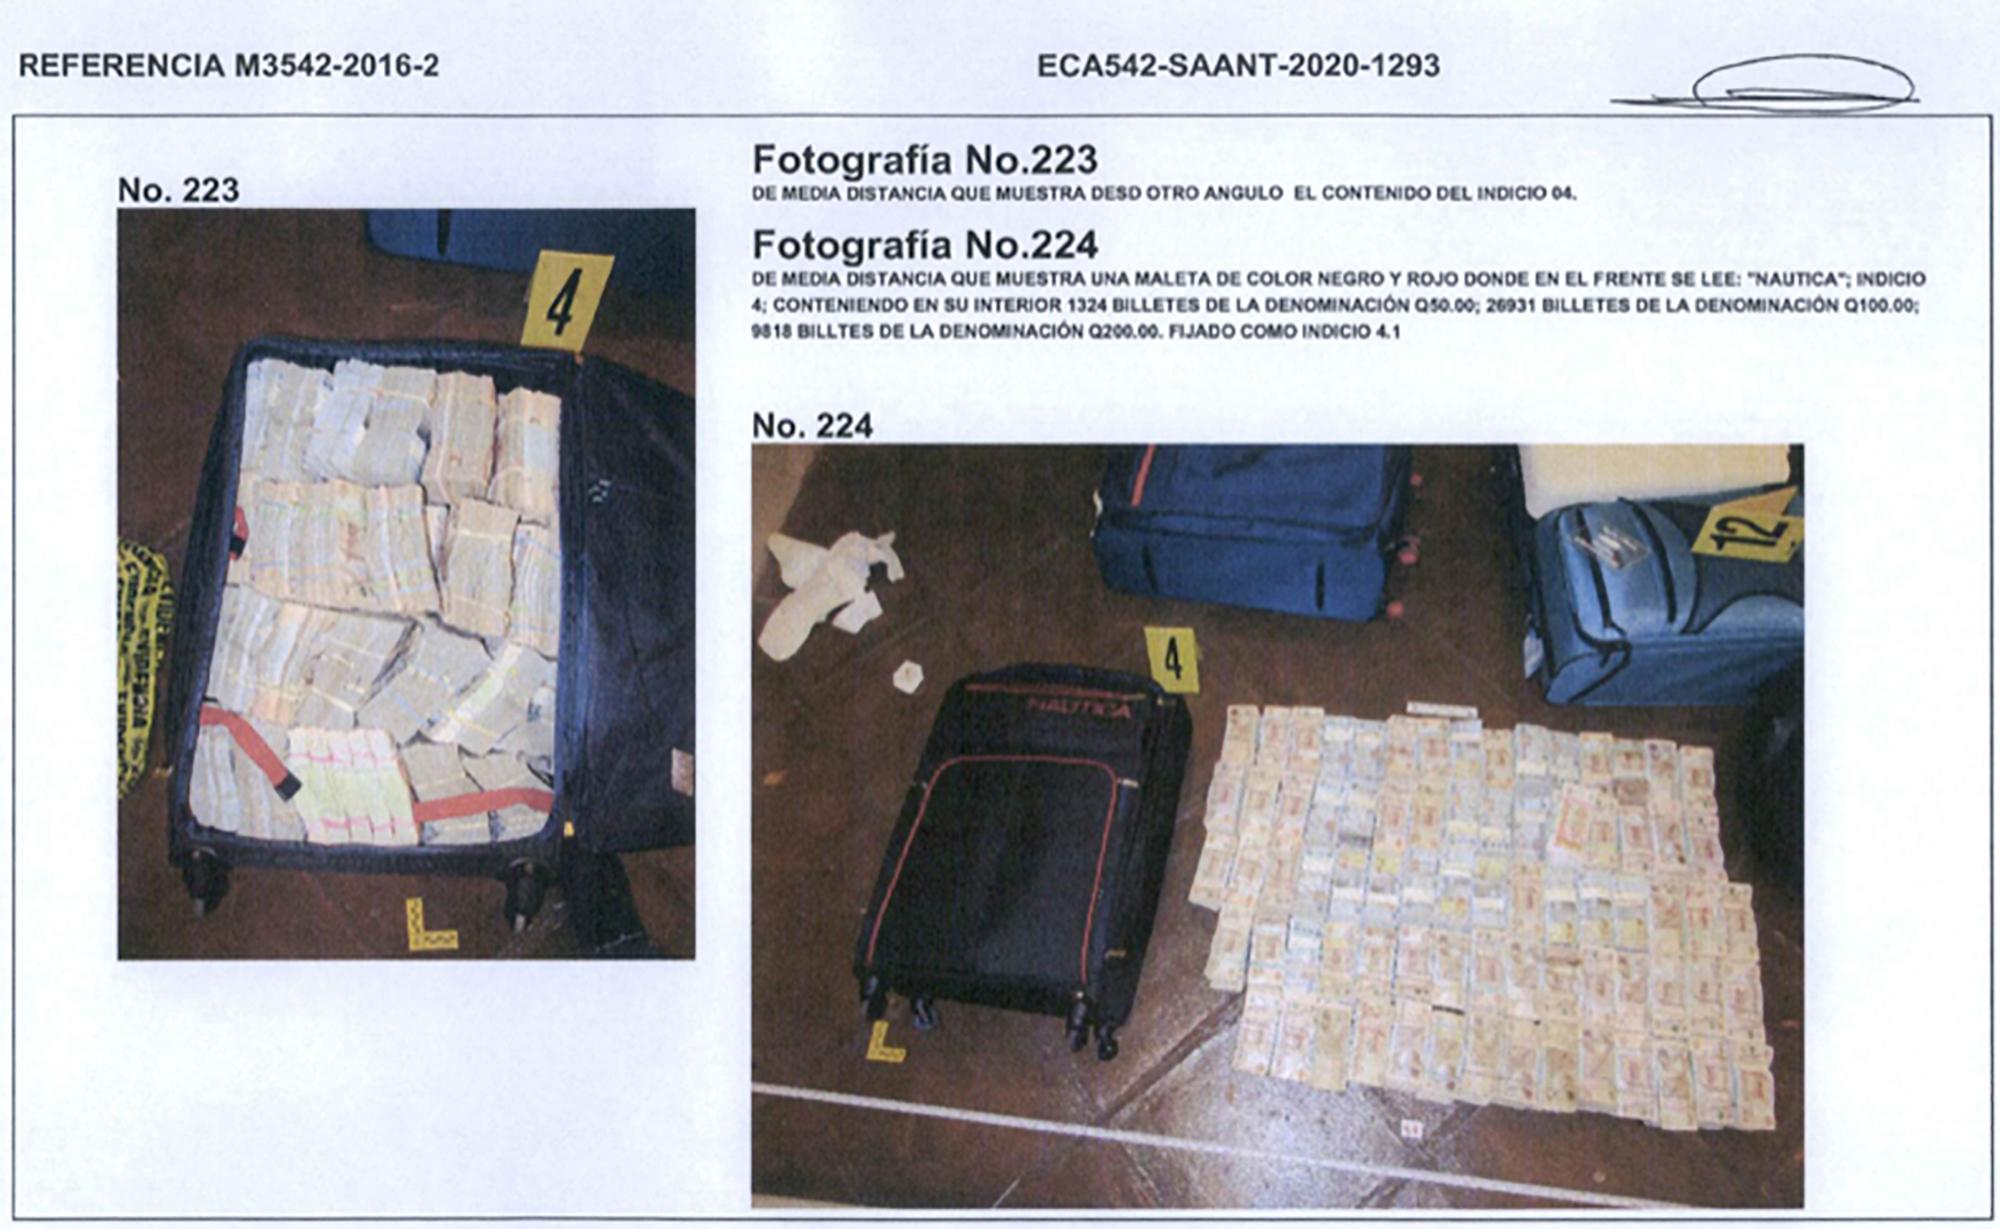 Page of the report by the Public Prosecutor's Office after conducting its October 2020 raid on a home in Antigua Guatemala. During the operation, prosecutors found 22 suitcases of cash totaling more than $16 million USD. Photo: El Faro